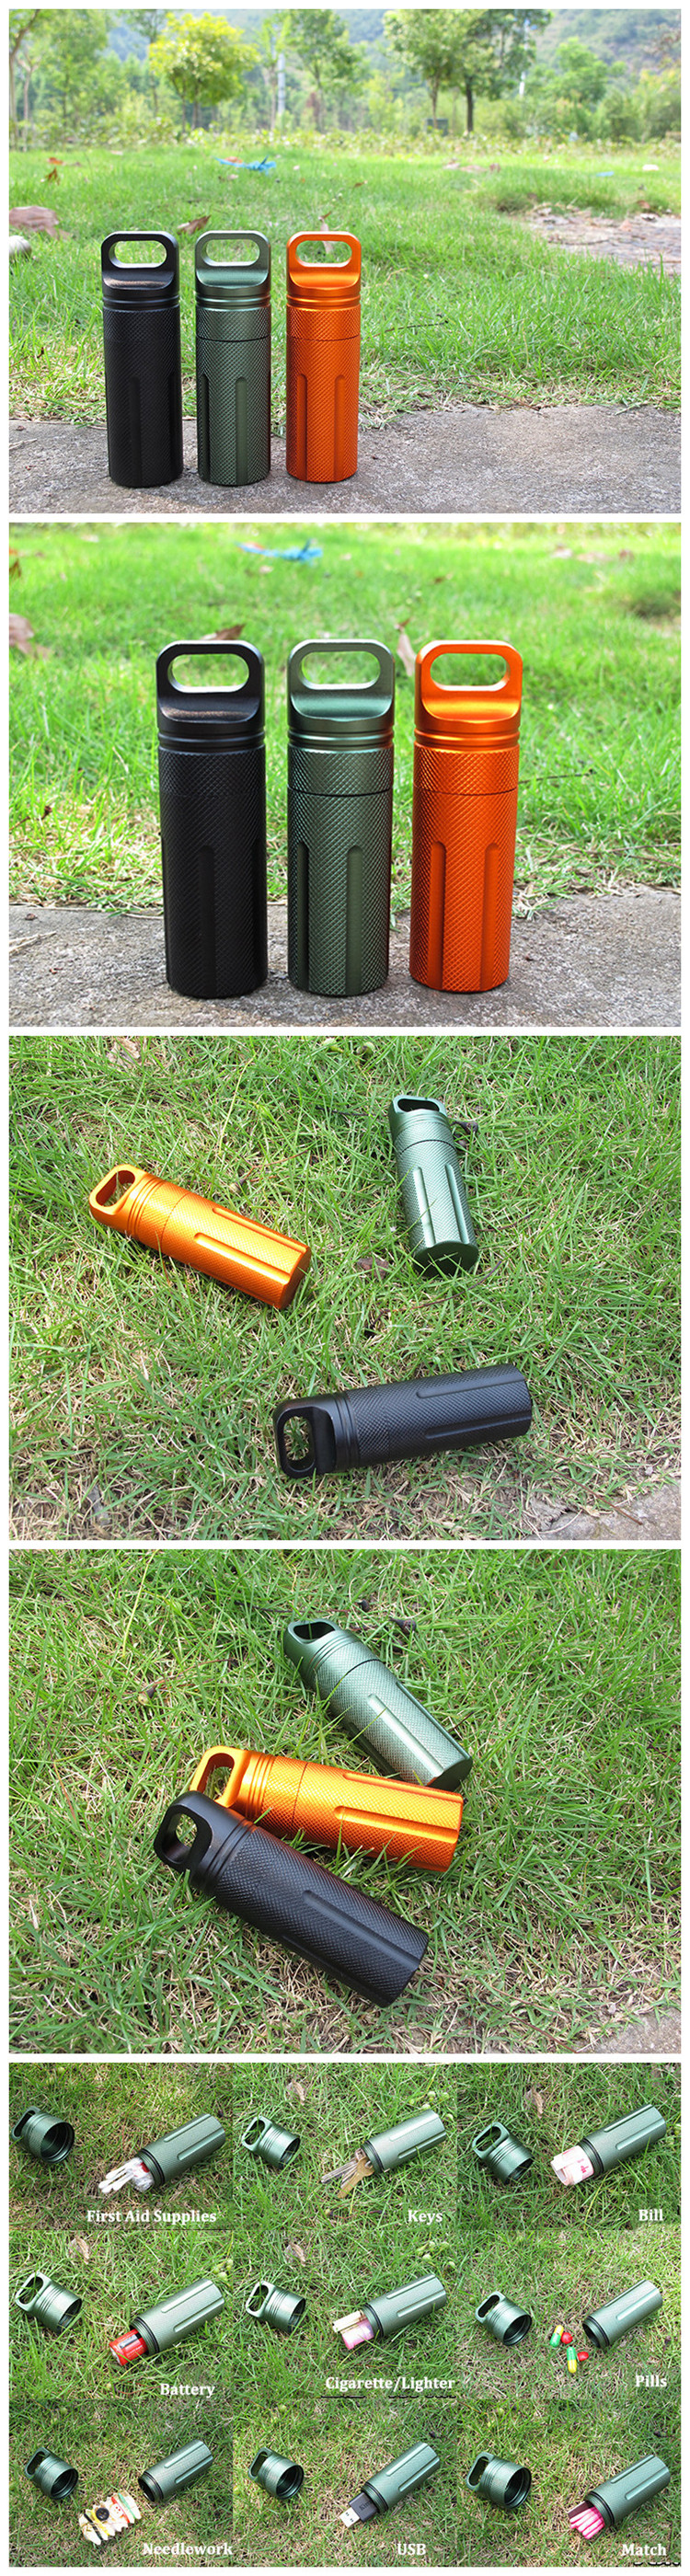 IPReetrade-Outdoor-CNC-Waterproof-Pill-Storage-Case-EDC-Seal-Canister-Survival-Emergency-Container-1080188-4